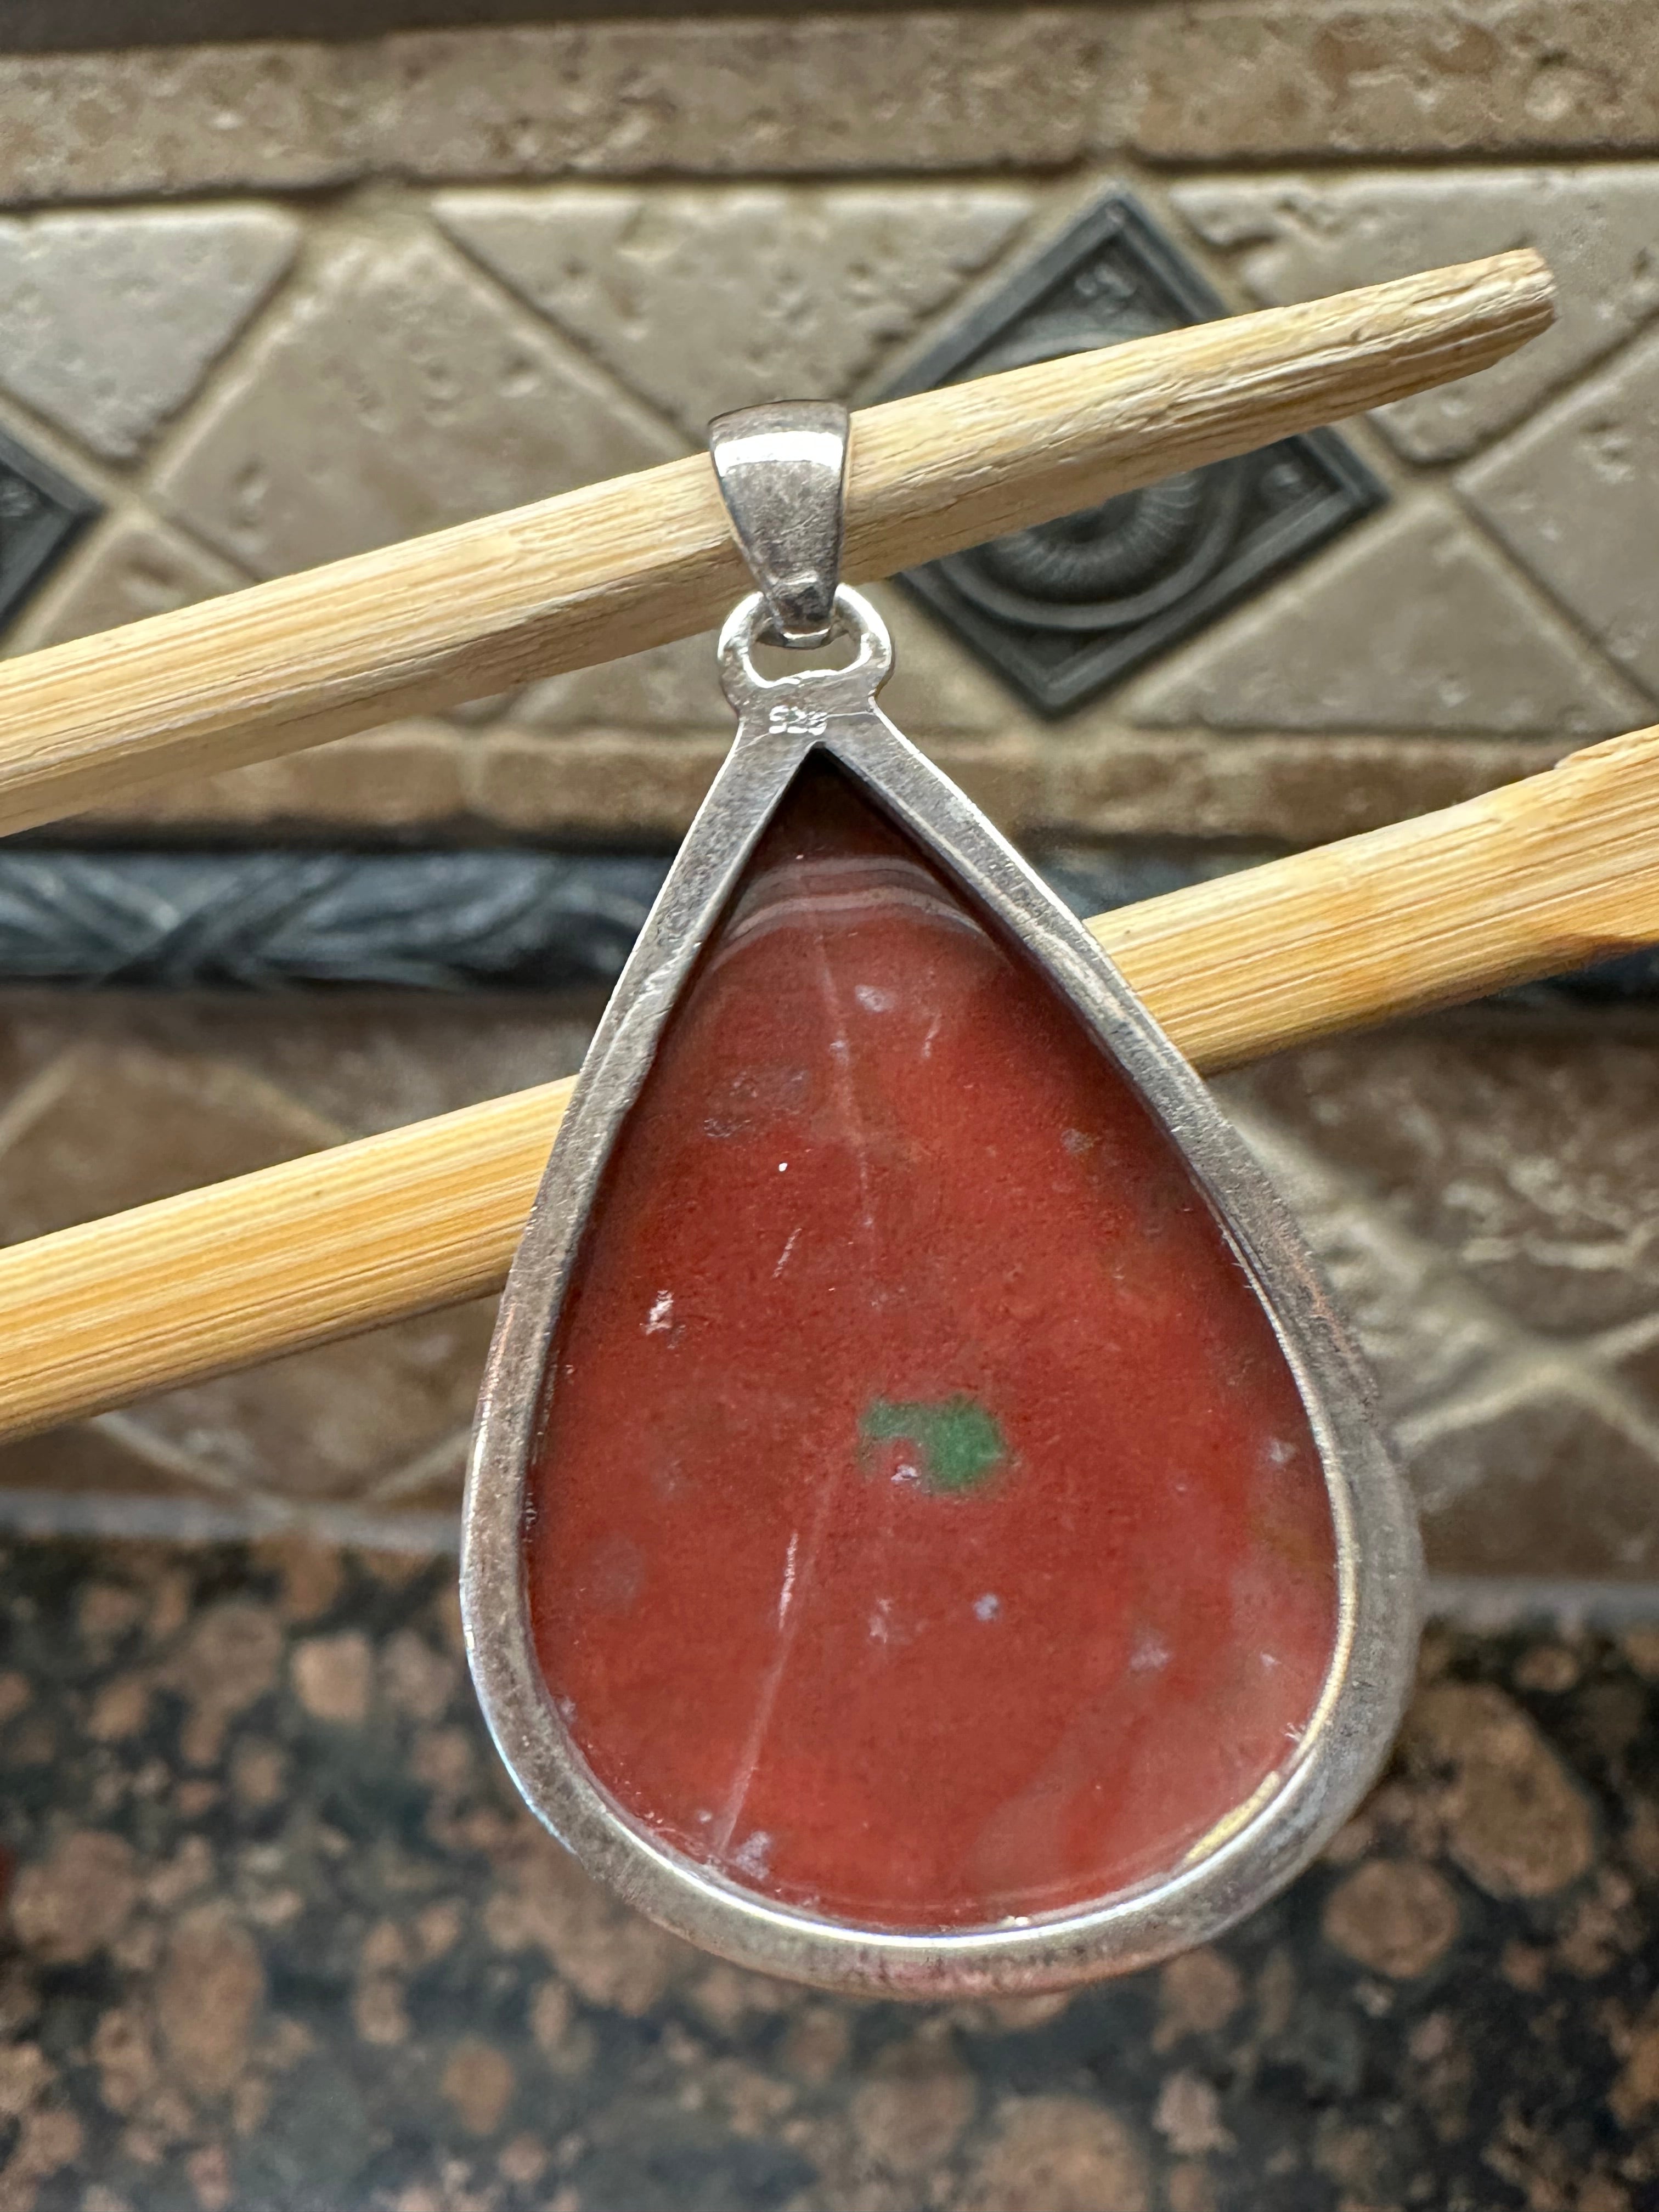 Natural Bloodstone 925 Solid Sterling Silver Pendant 45mm